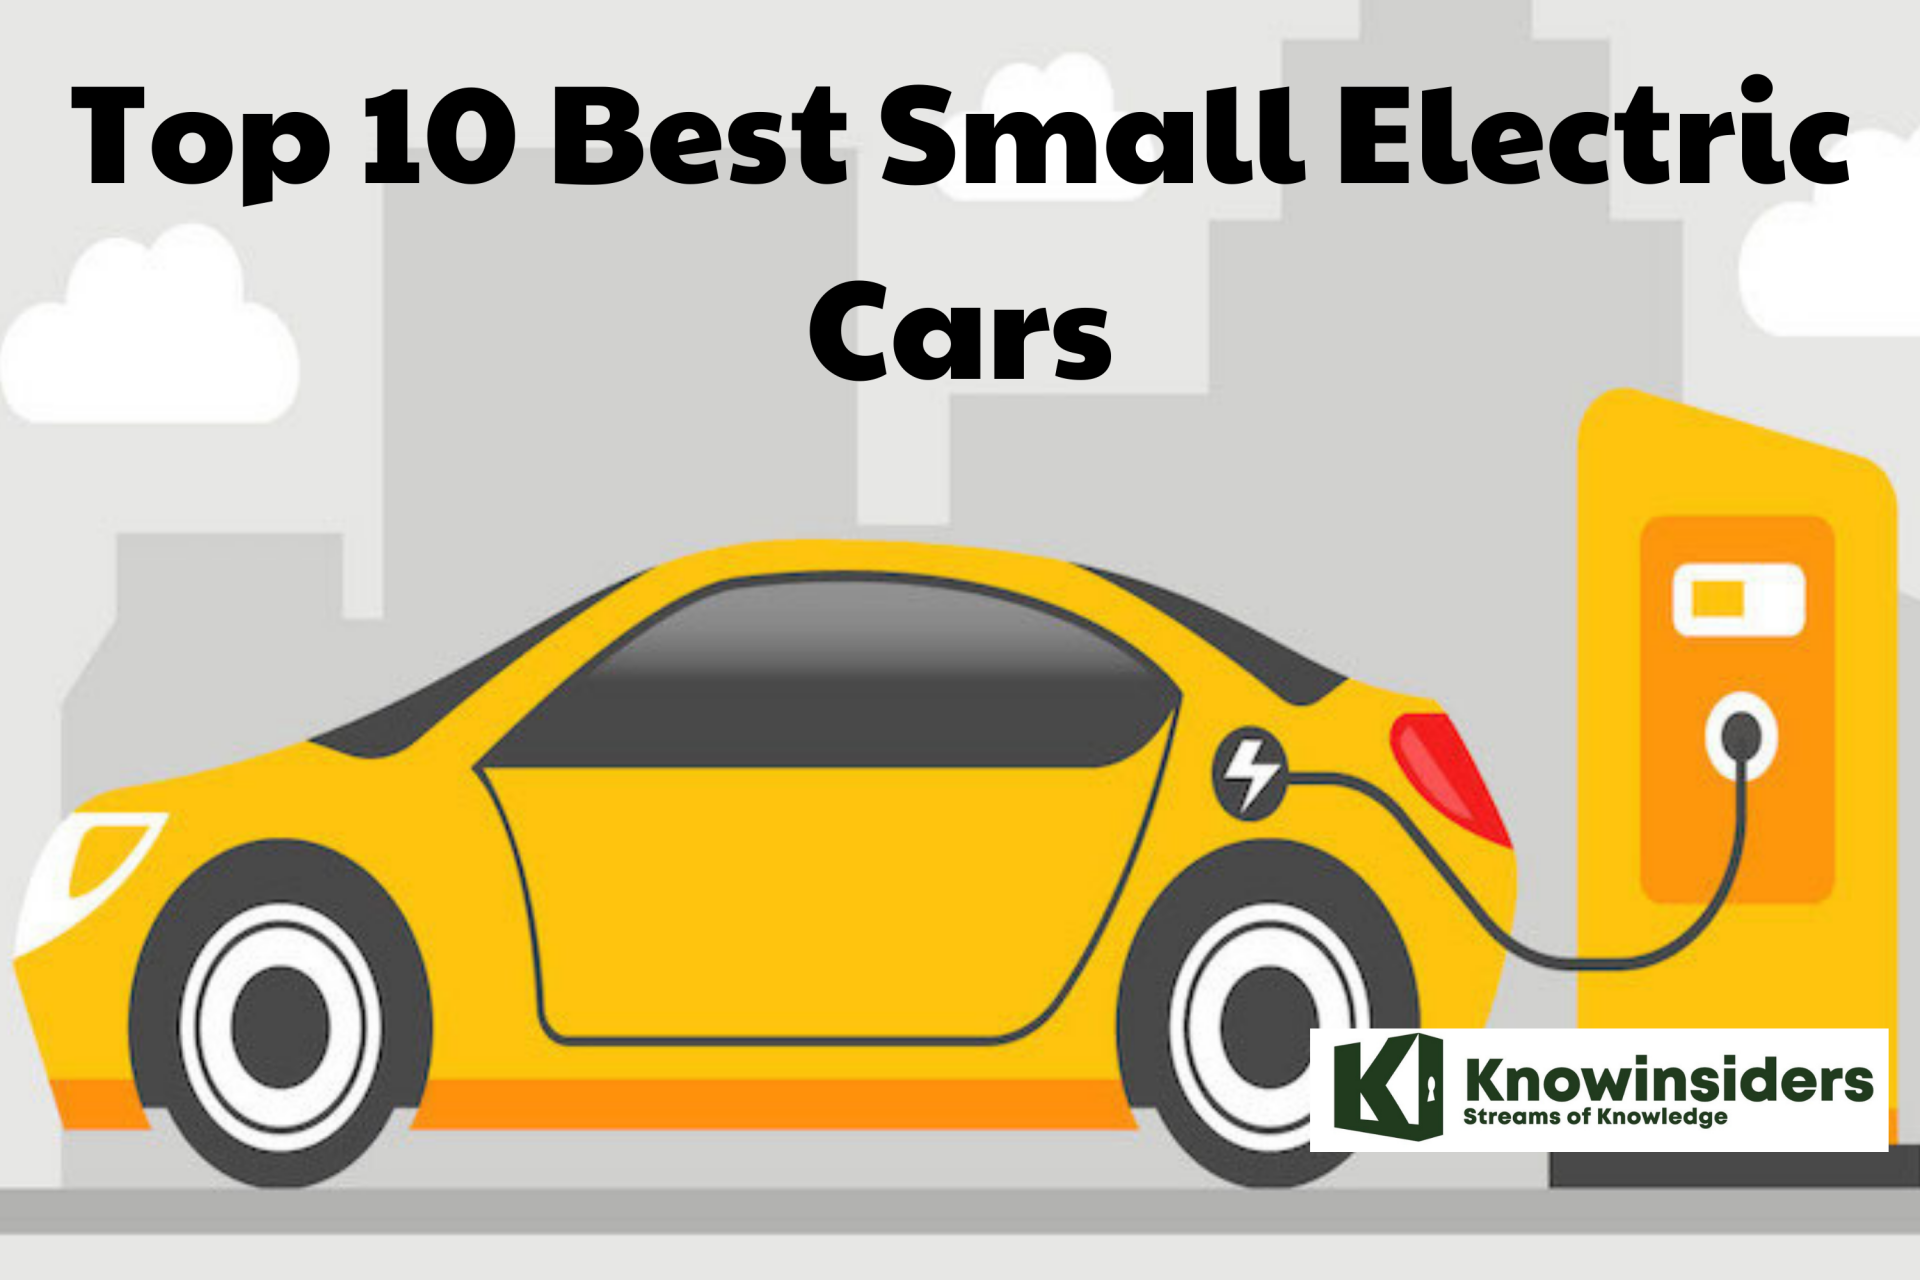 Top 10 Best Small Electric Cars